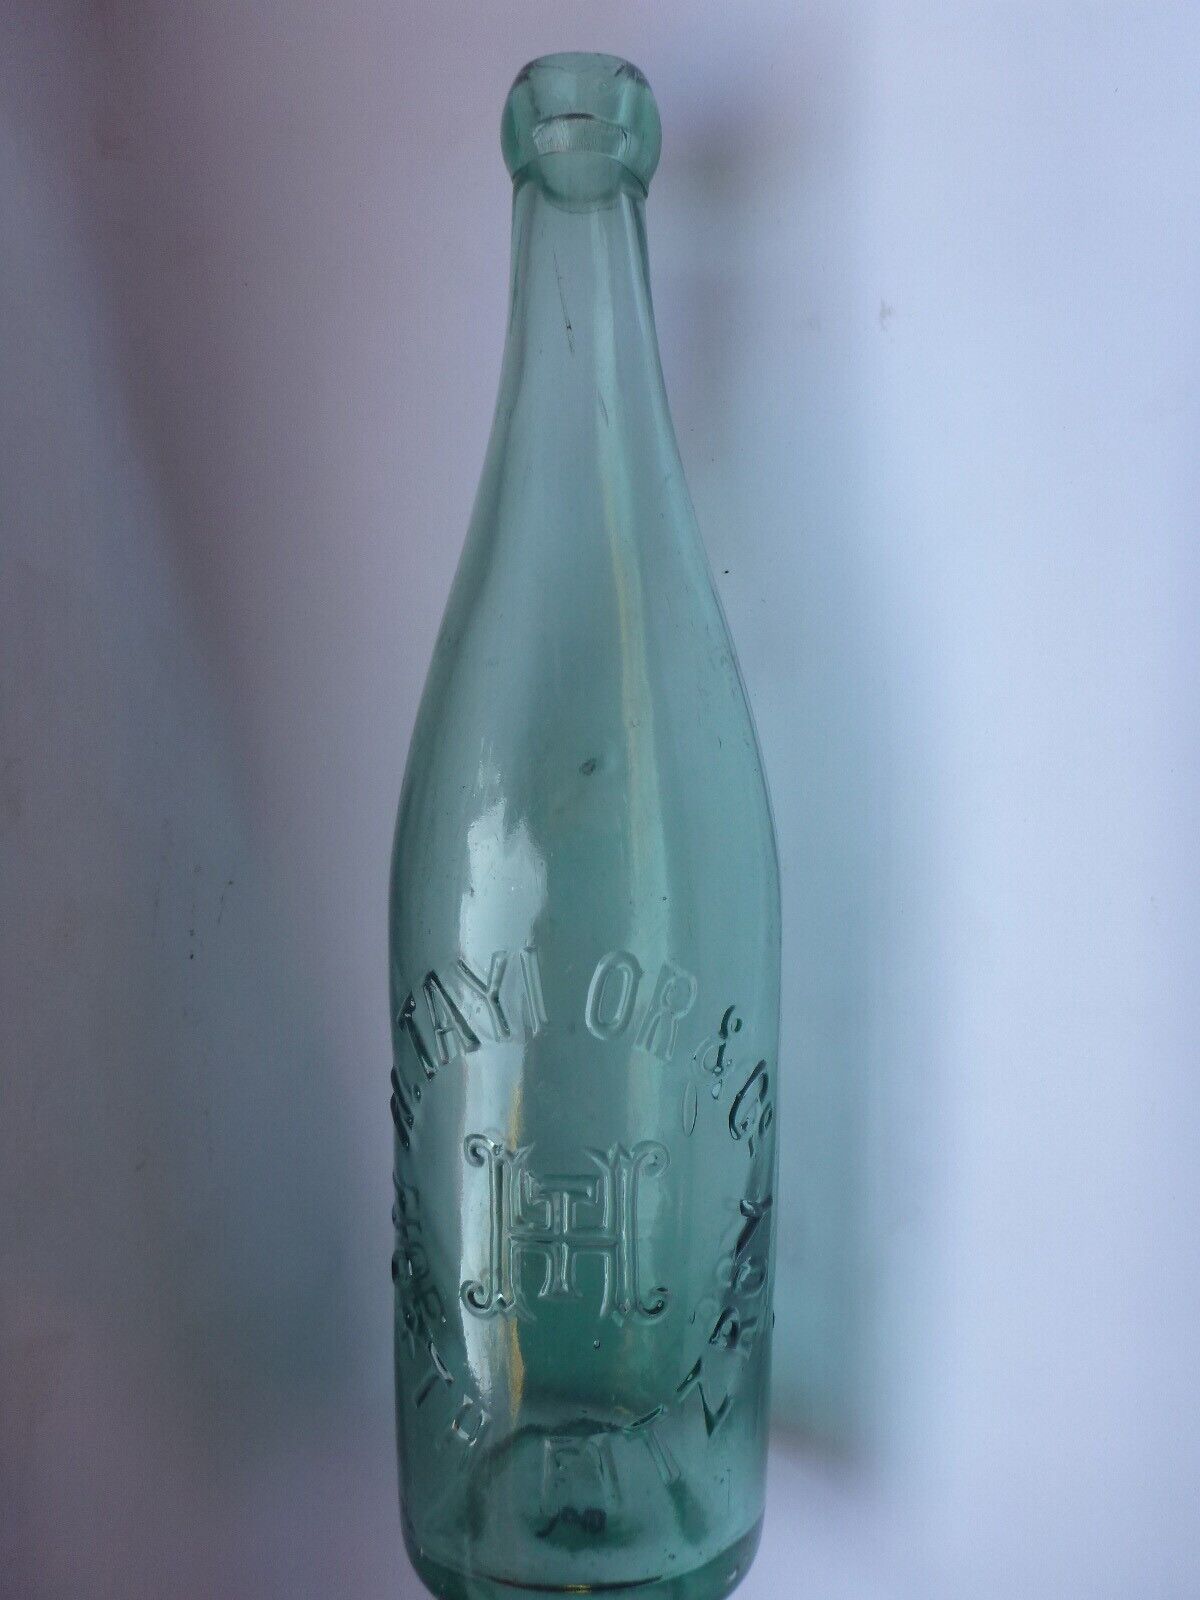 ANTIQUE H.TAYLOR & Co Nth FITZRY AERATED WATERS BLOB TOP  BOTTLE